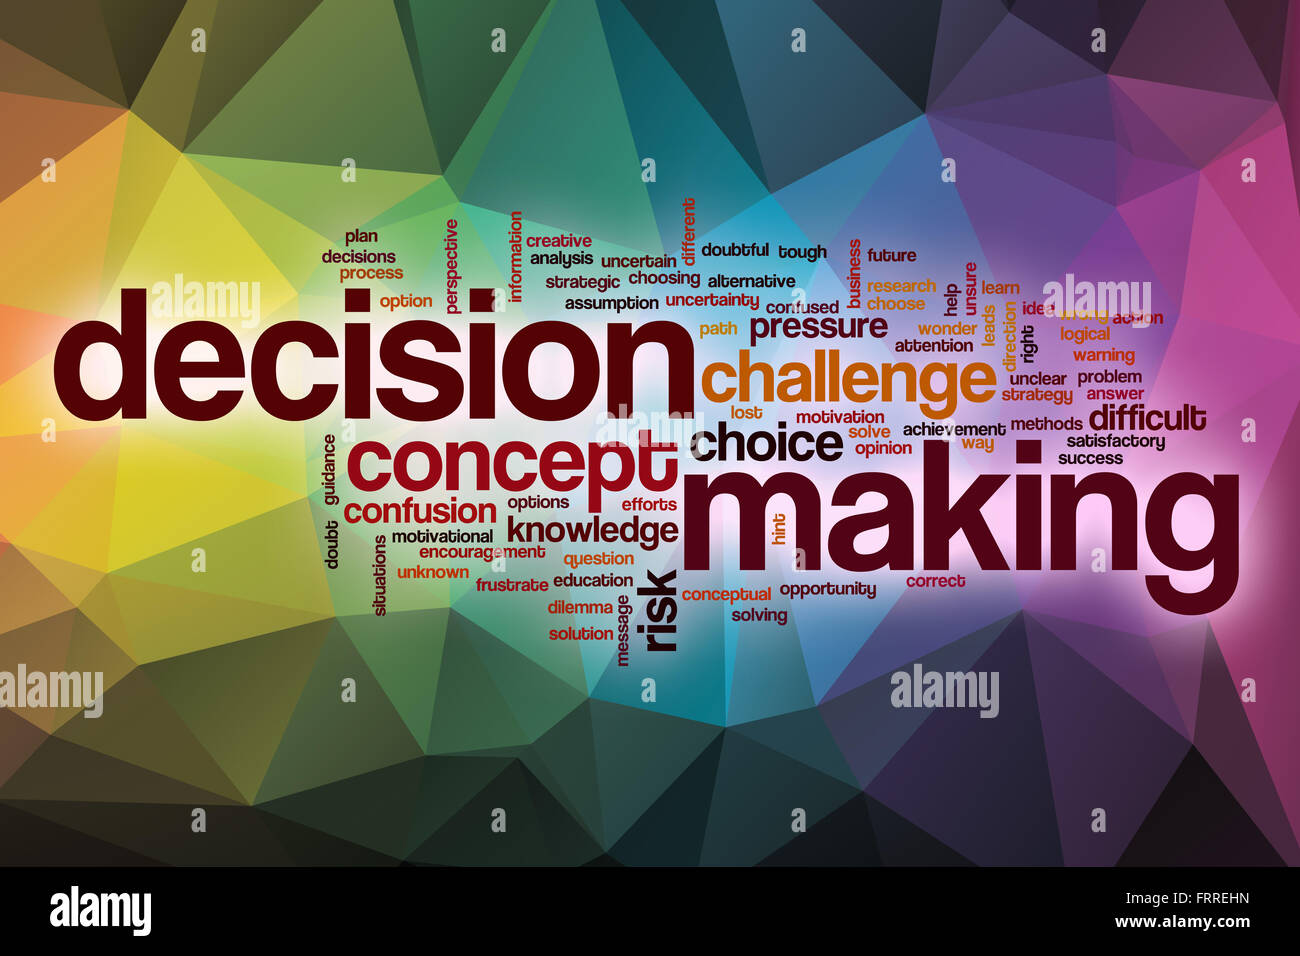 Decision making word cloud concept with abstract background Stock Photo